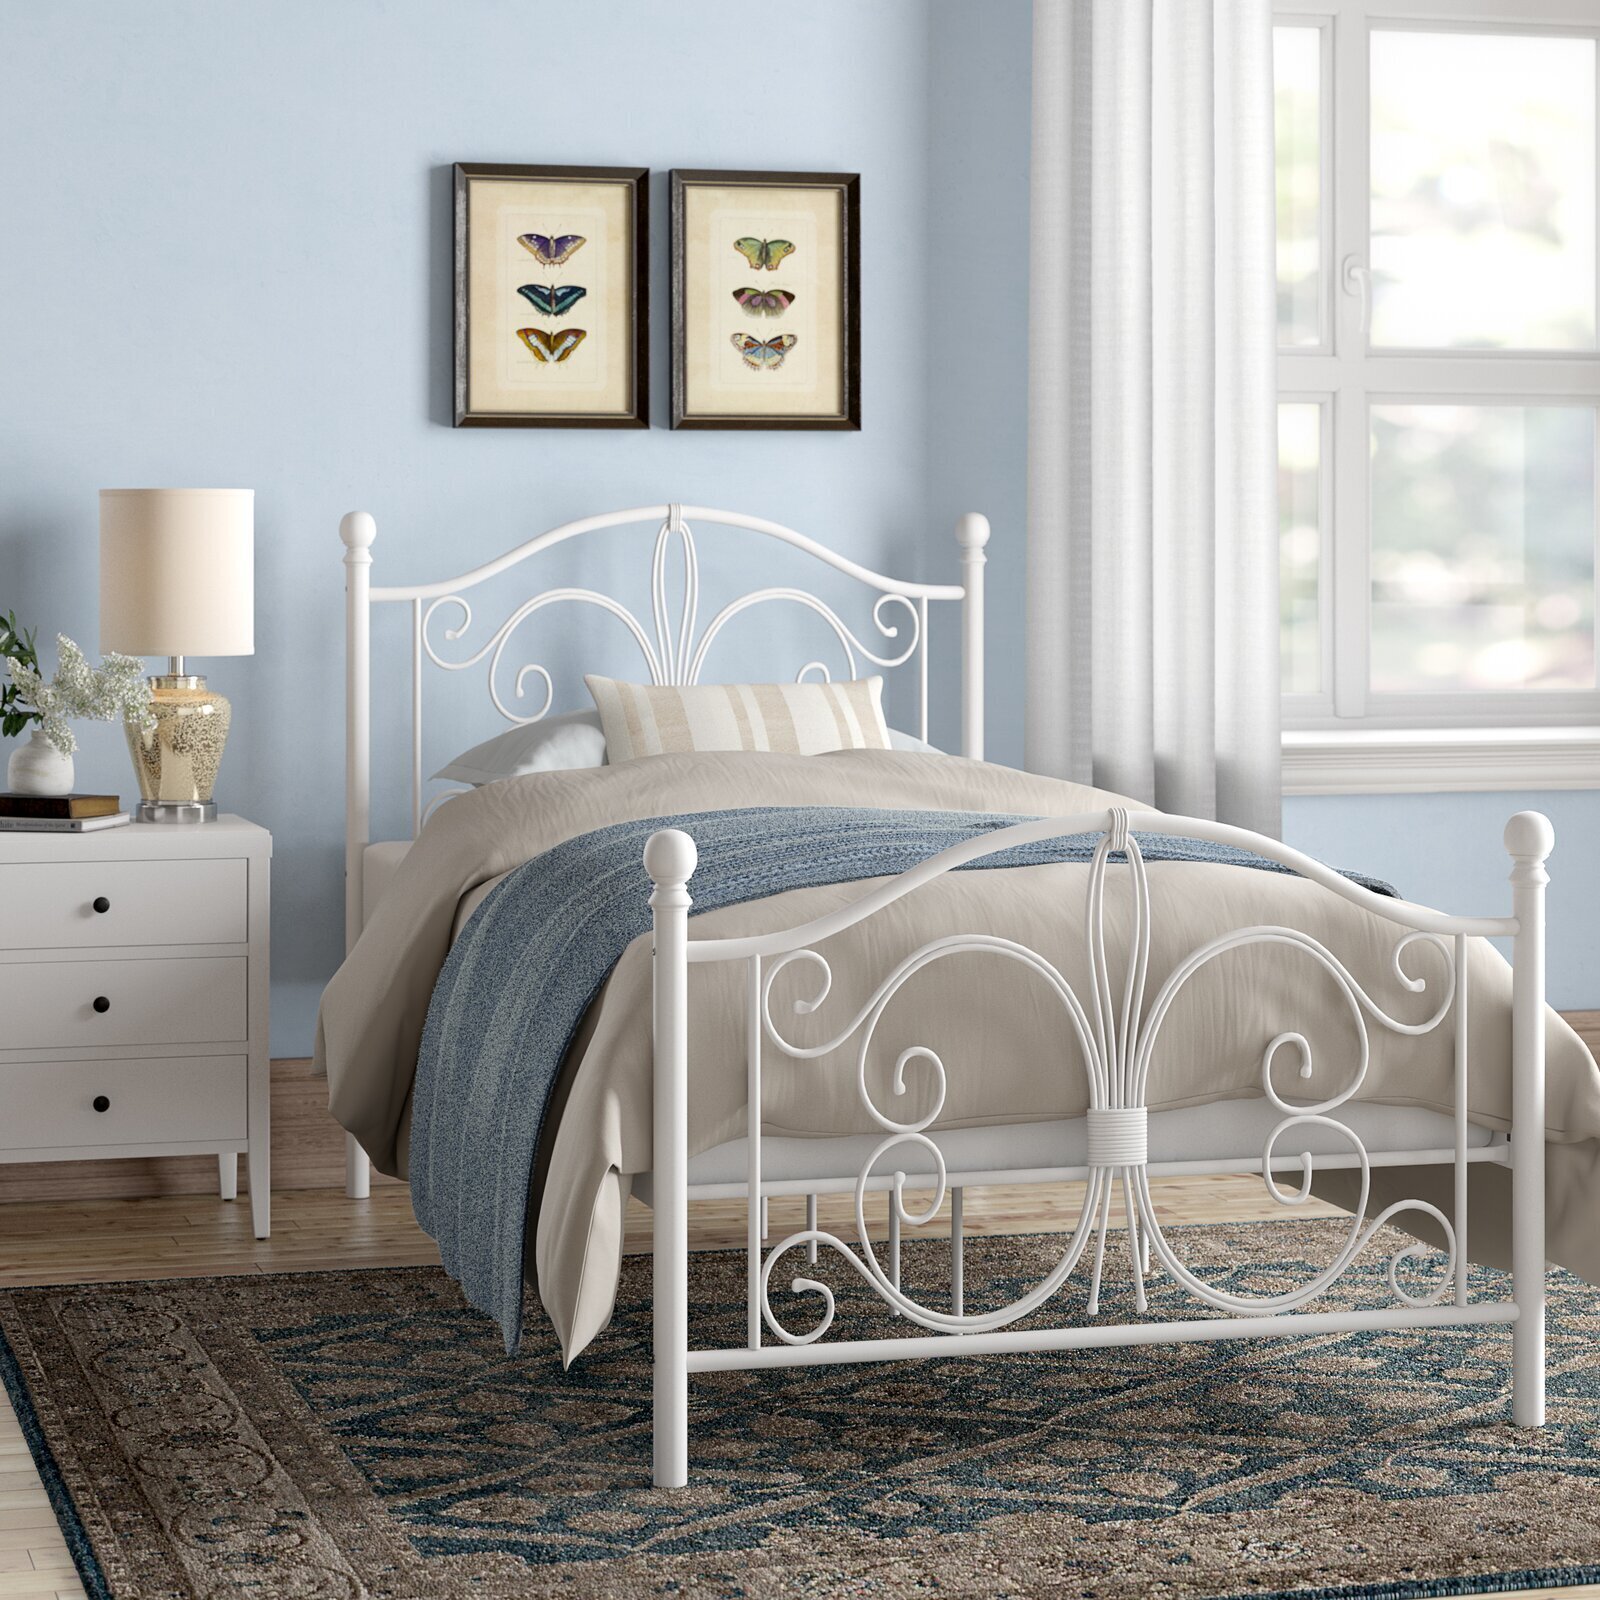 Colonial style metal twin platform bed